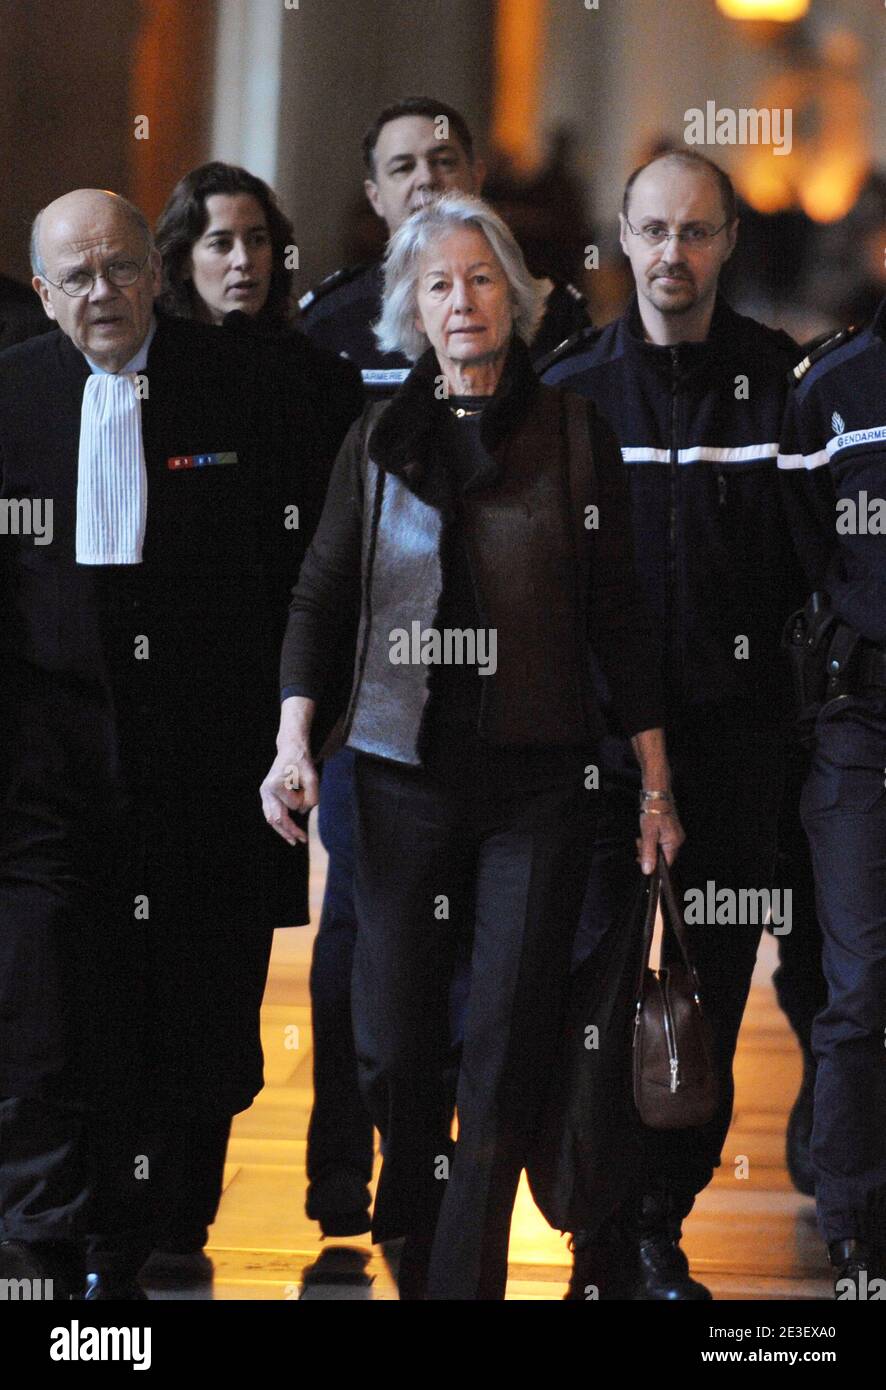 Dominique Erignac, widow of former French prefect Claude Erignac, arrives with her daughter and her lawyer Philippe Lemaire to the Paris courthouse to attend the Yvan Colonna Trial, in Paris, France, on February 9, 2009. Photo by Mousse/ABACAPRESS.COM Stock Photo